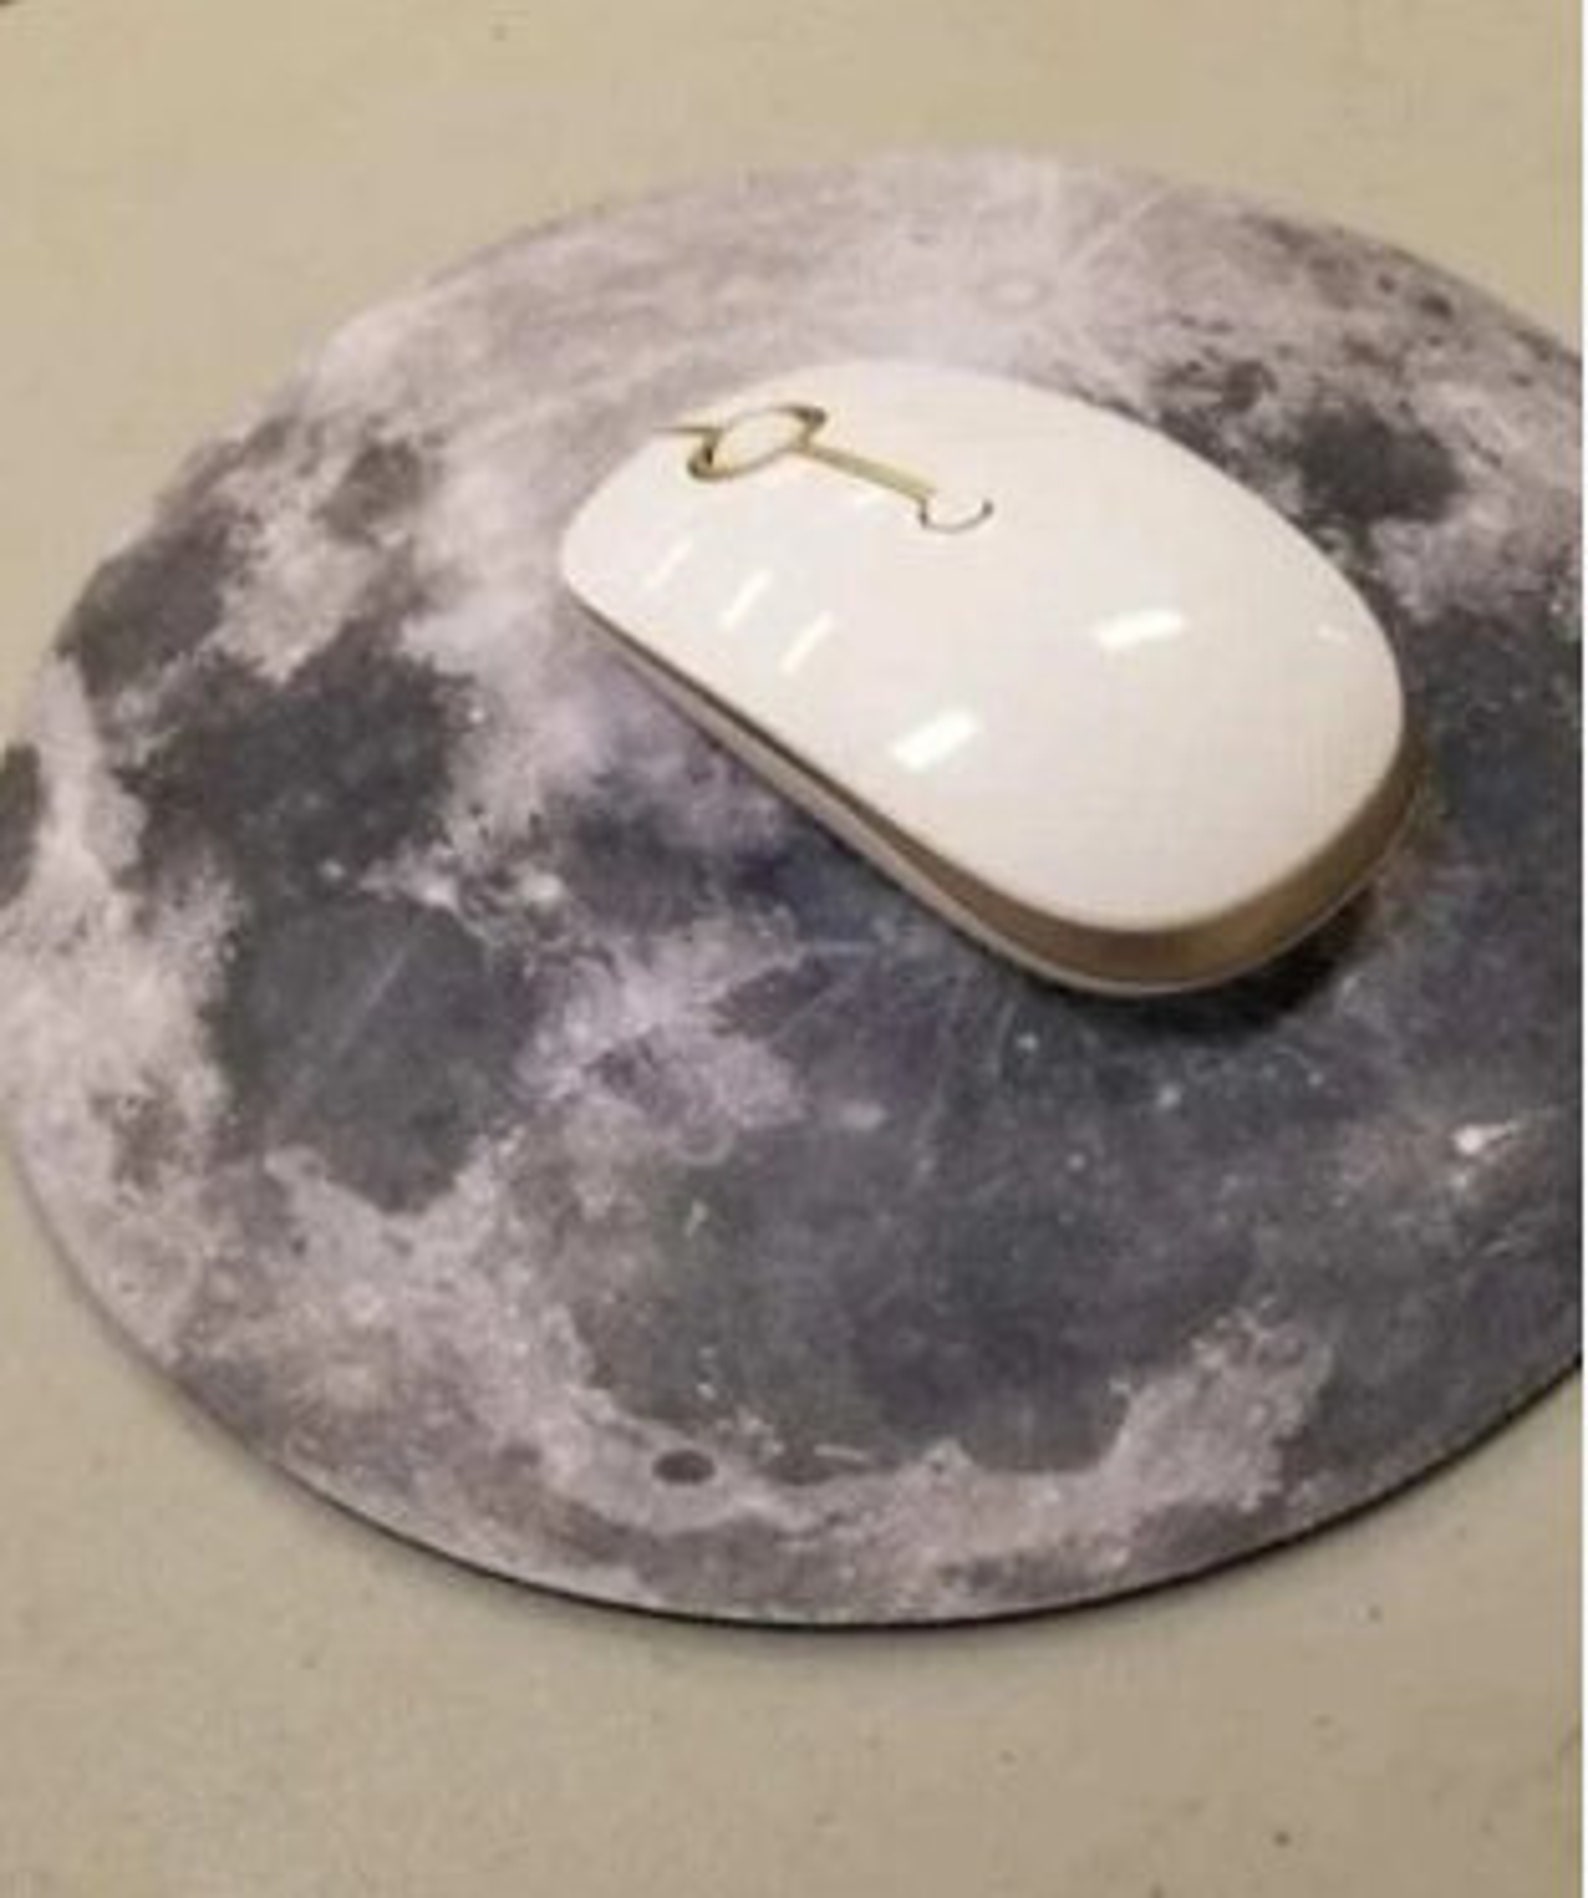 Full Moon Over Lake Mouse Pad 9.25" X 7.75"